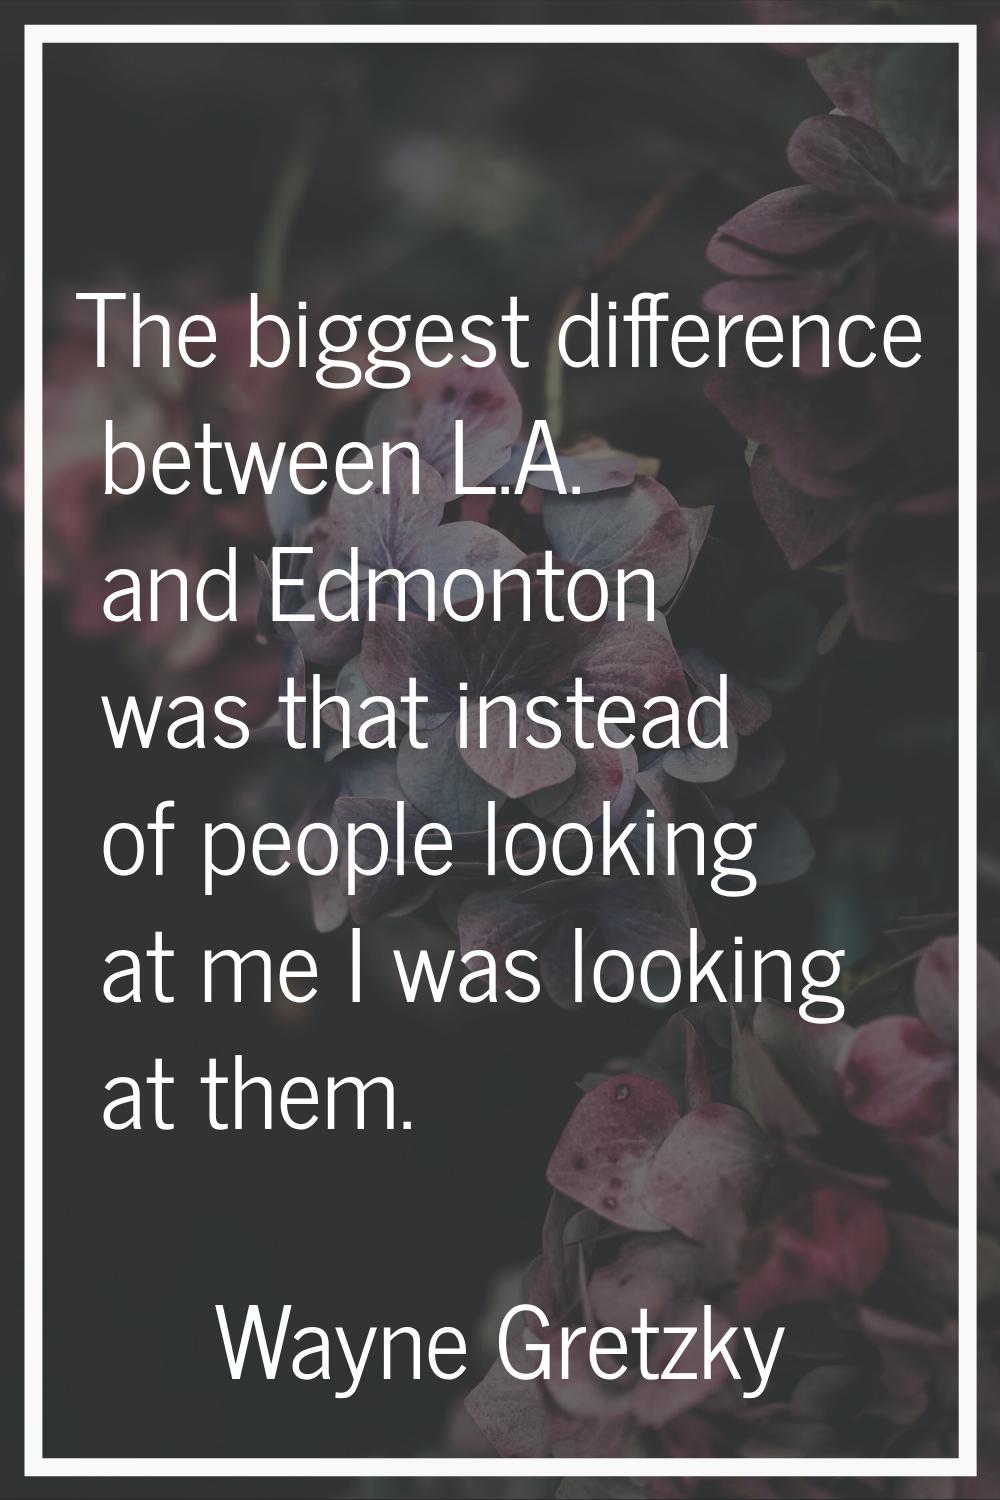 The biggest difference between L.A. and Edmonton was that instead of people looking at me I was loo